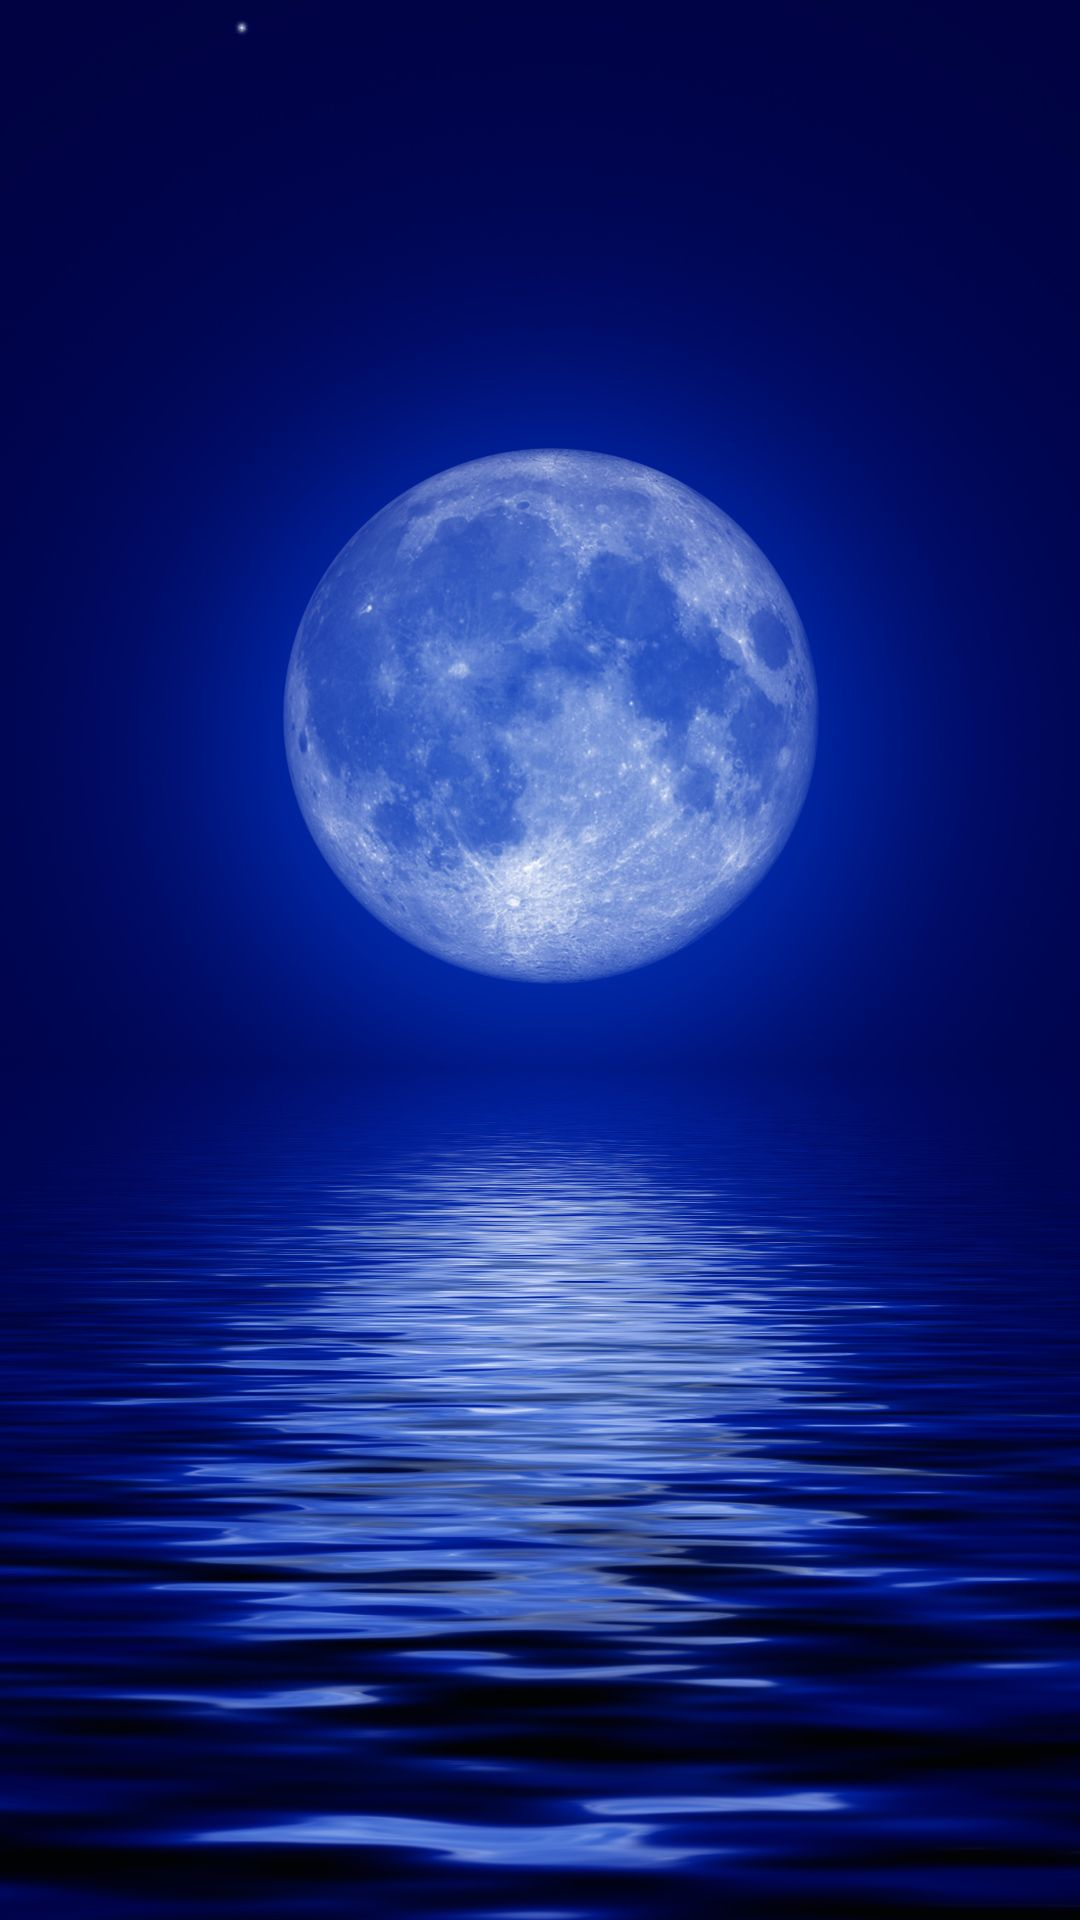 Someone looking at the moon Wallpaper 4k Ultra HD ID9211